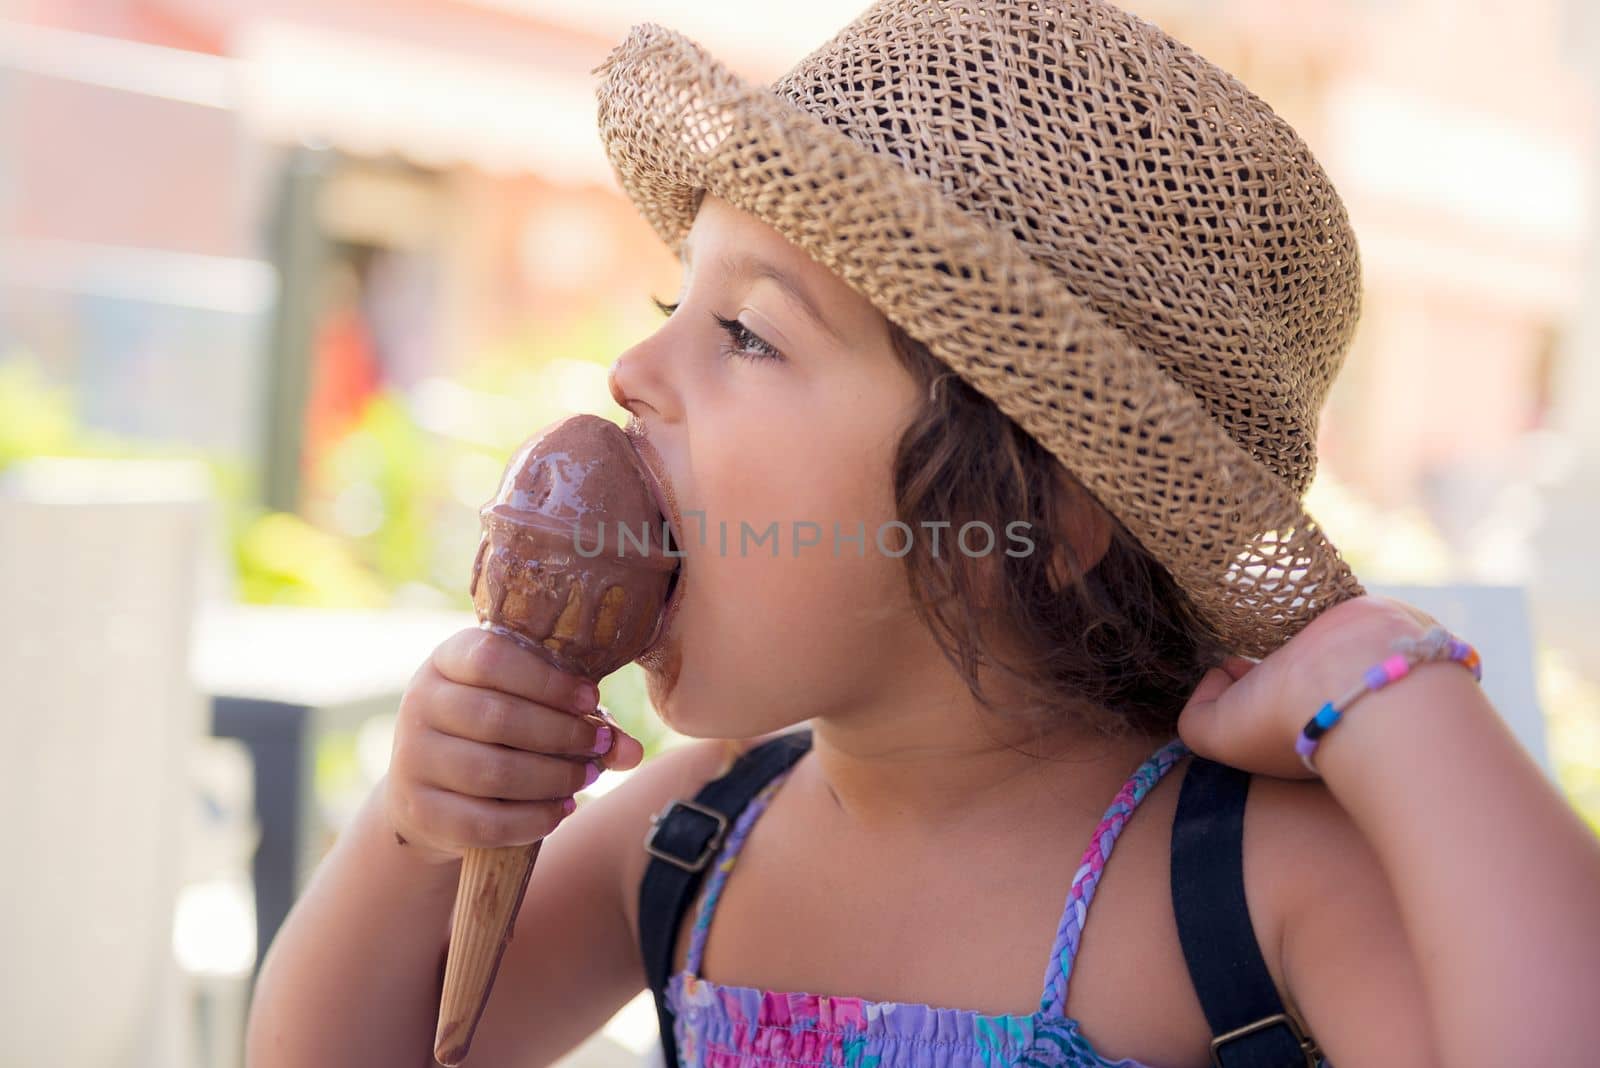 Girl eating an ice cream that melts in her hand by raulmelldo